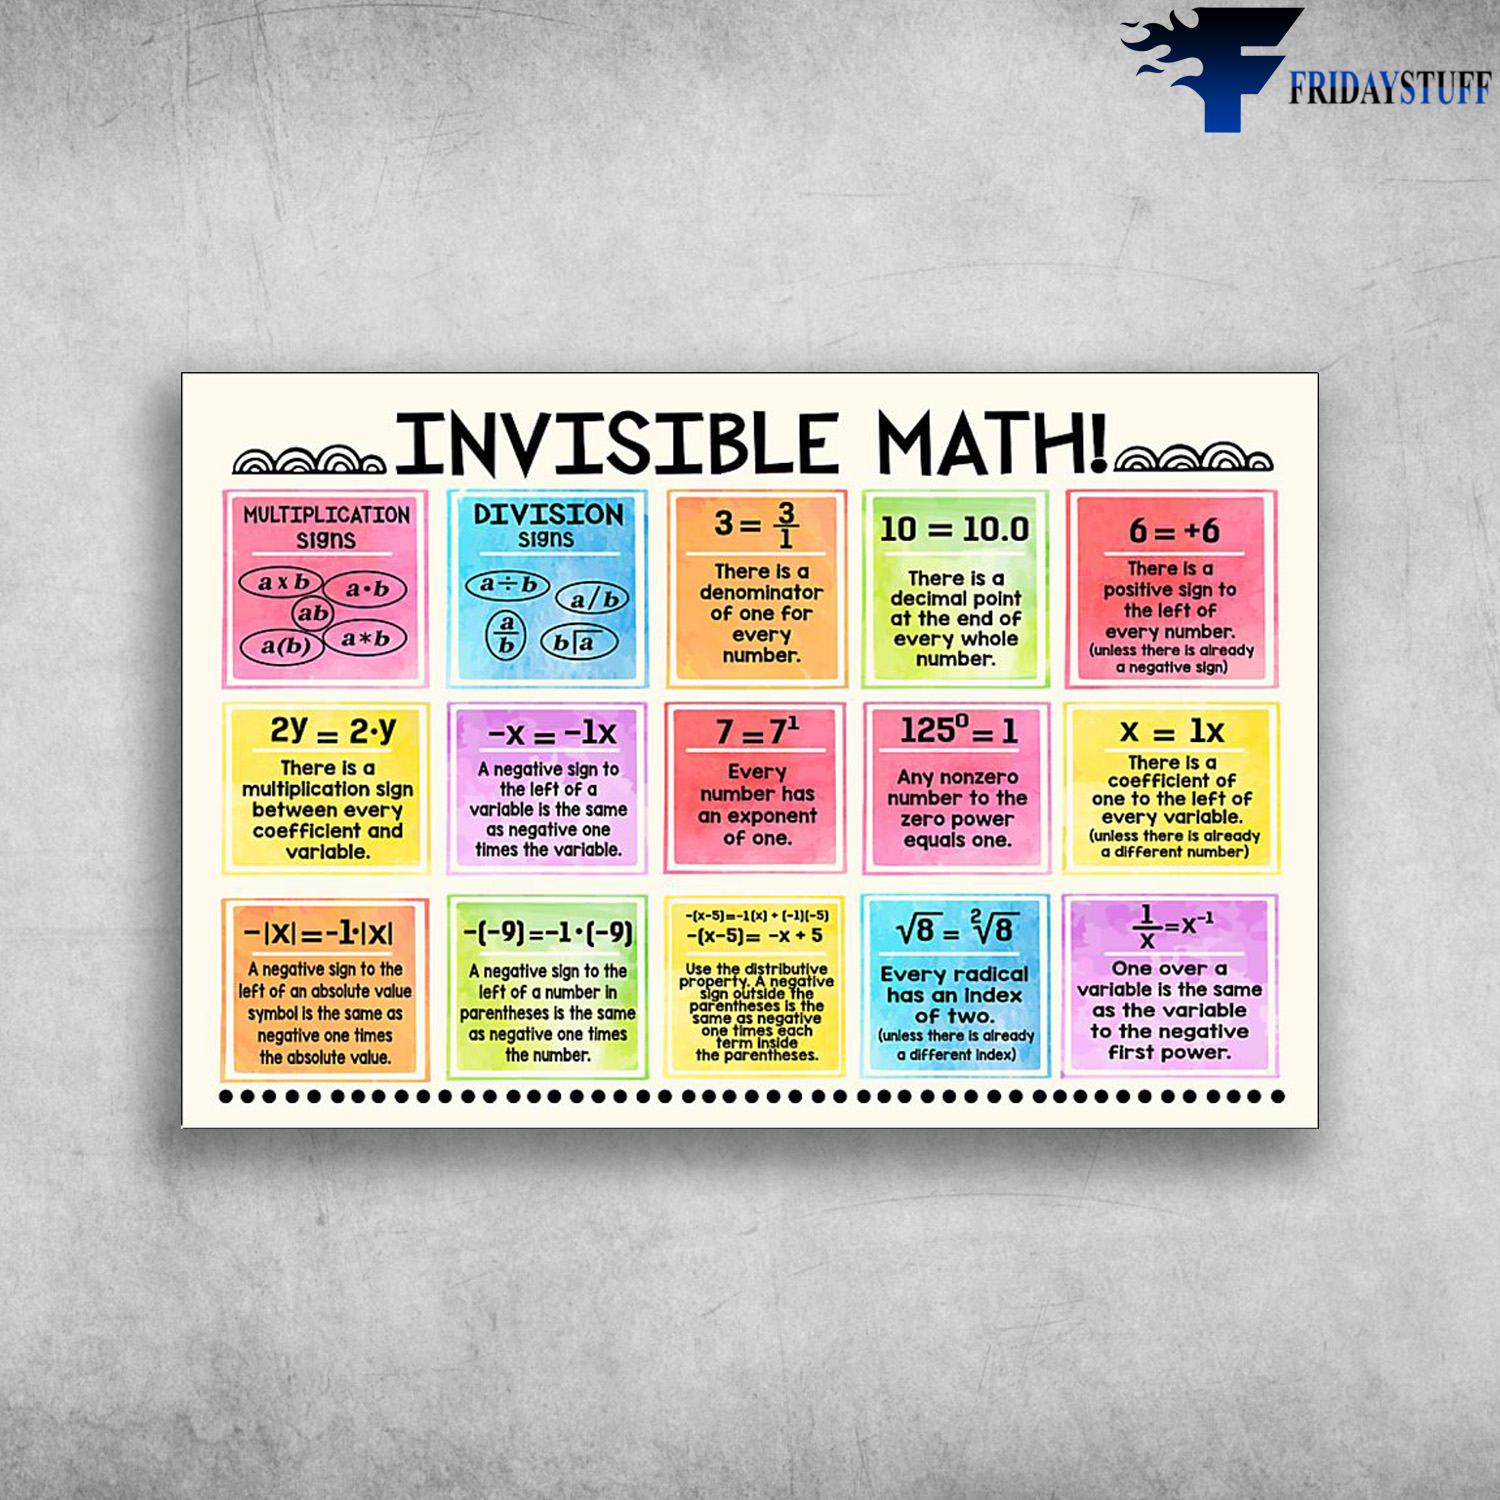 Math poster - Invisible Math, Multiplcation Signs, Division Signs, There Is A Denominator Of One For Every Number, There Is A Decimal Point At The End Of Every Whole Number